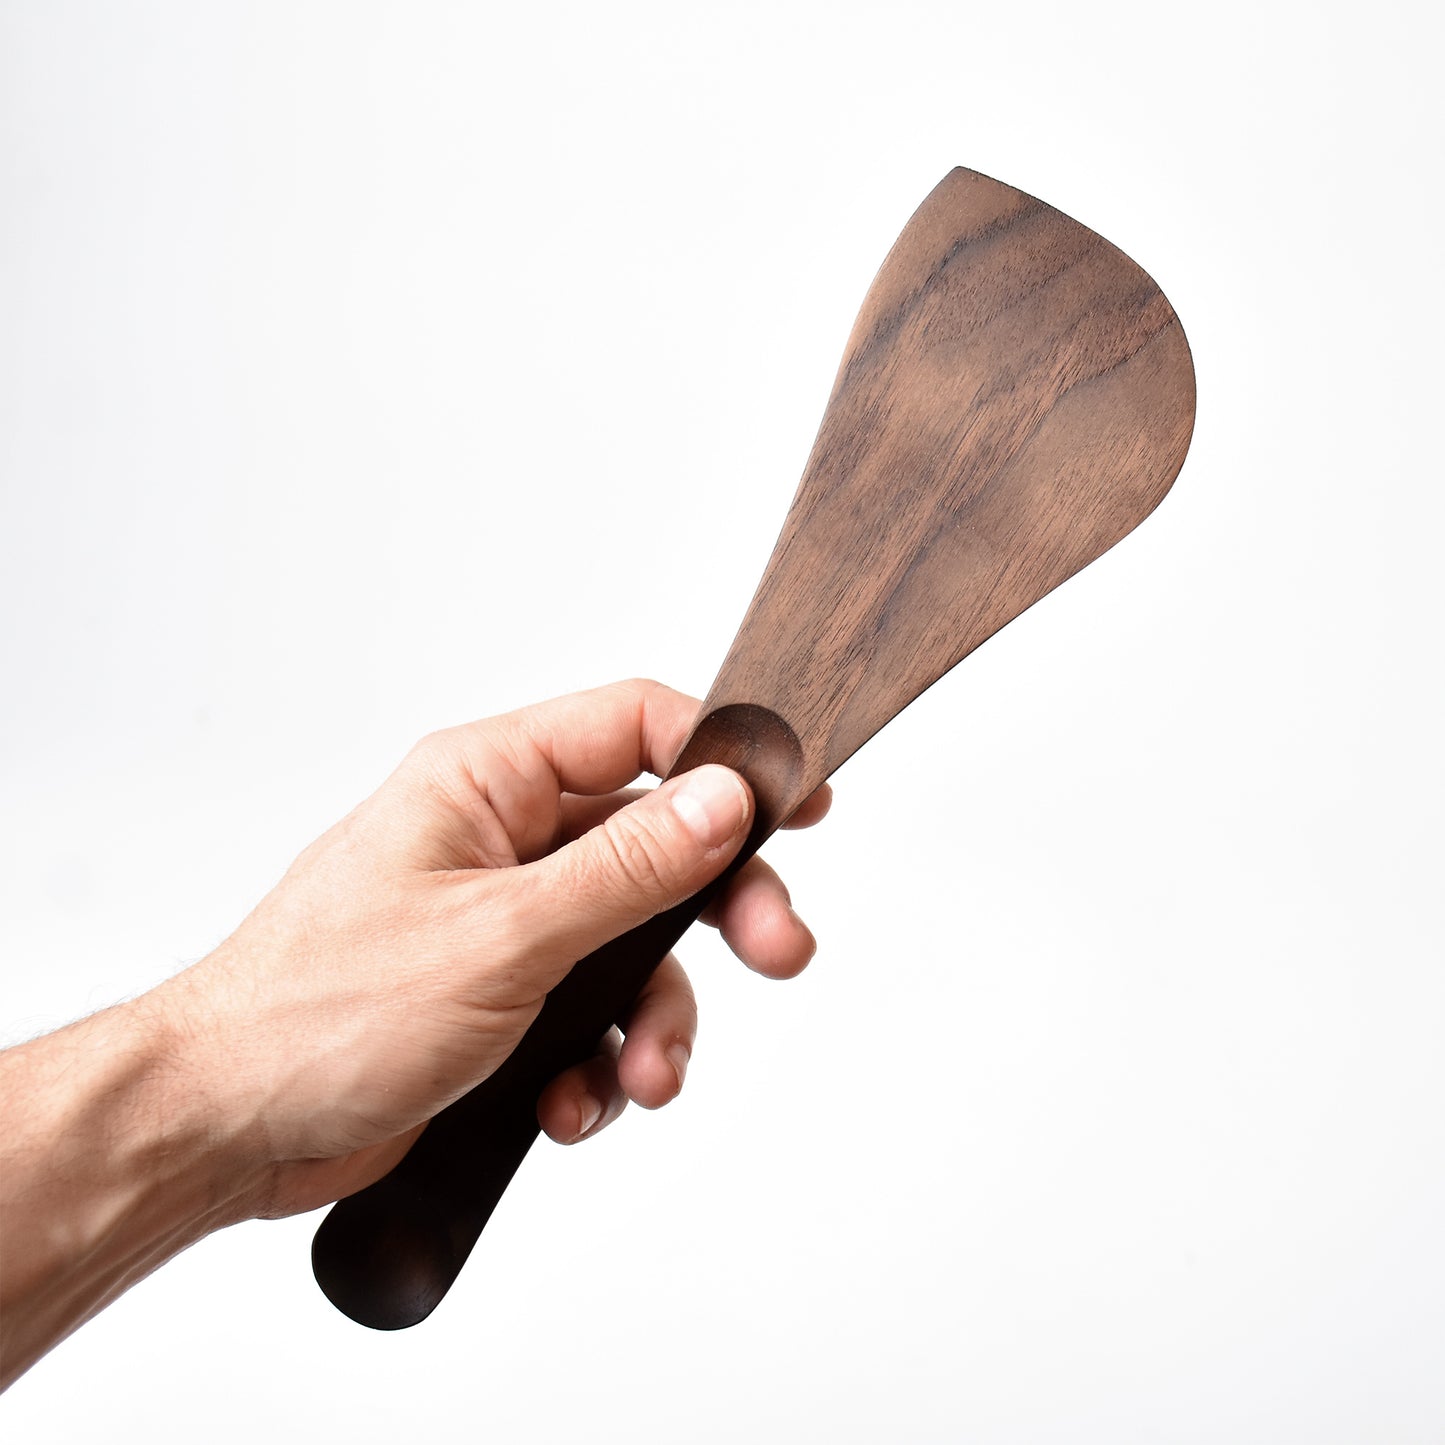 Carved Wooden Spatula - Walnut or Ash